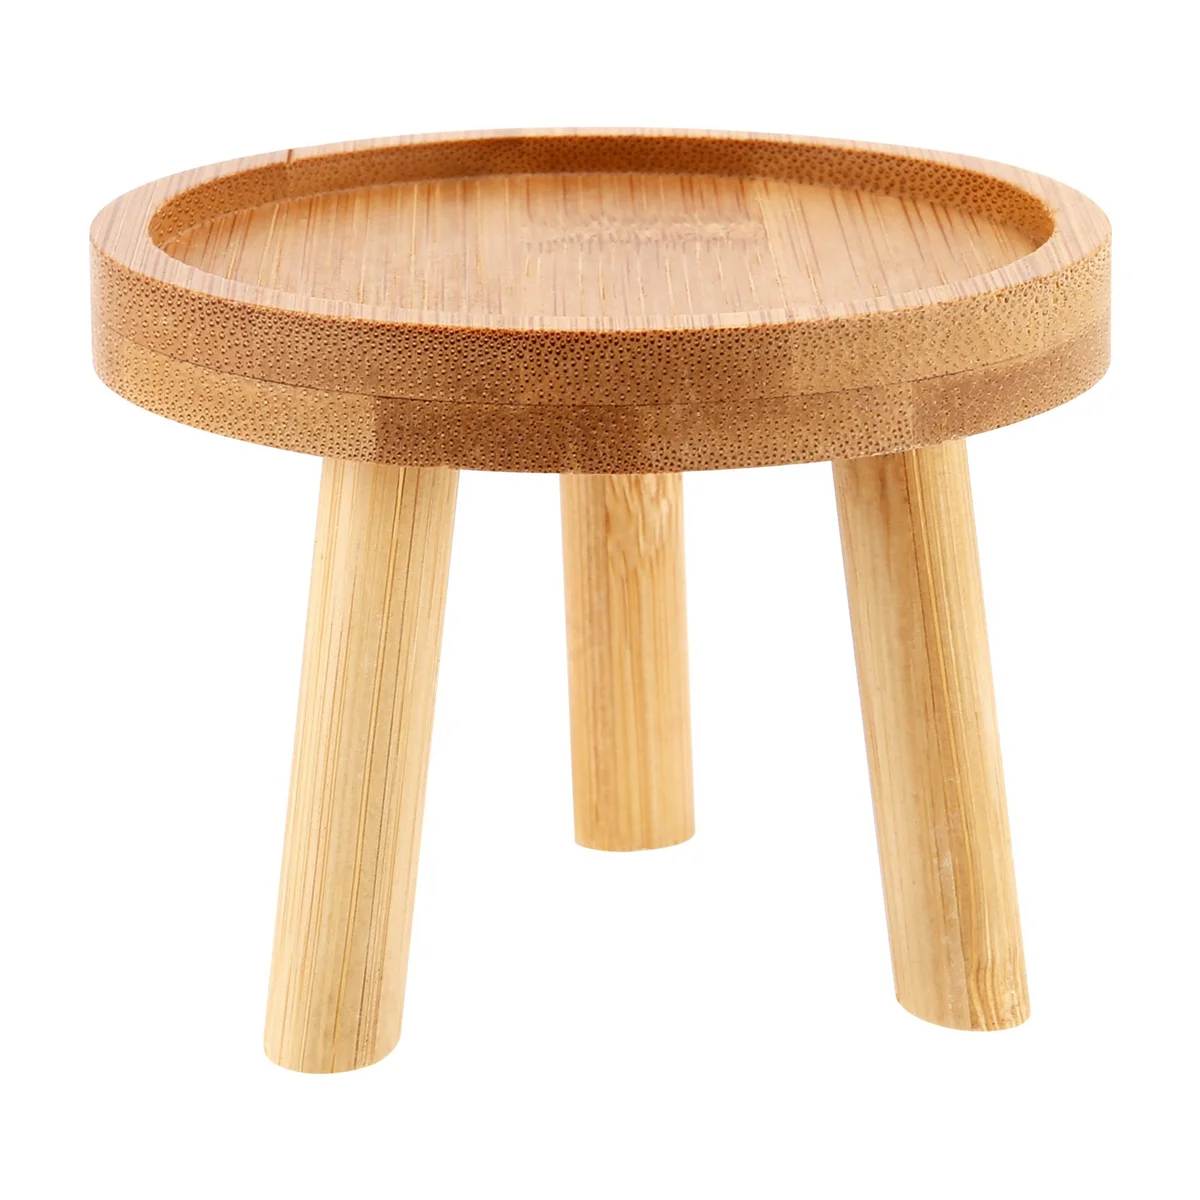 

Wooden Plant Stand Flower Pot Base Holder Stool High Stool Balcony Succulent Round Flower Shelf for Indoor Outdoor